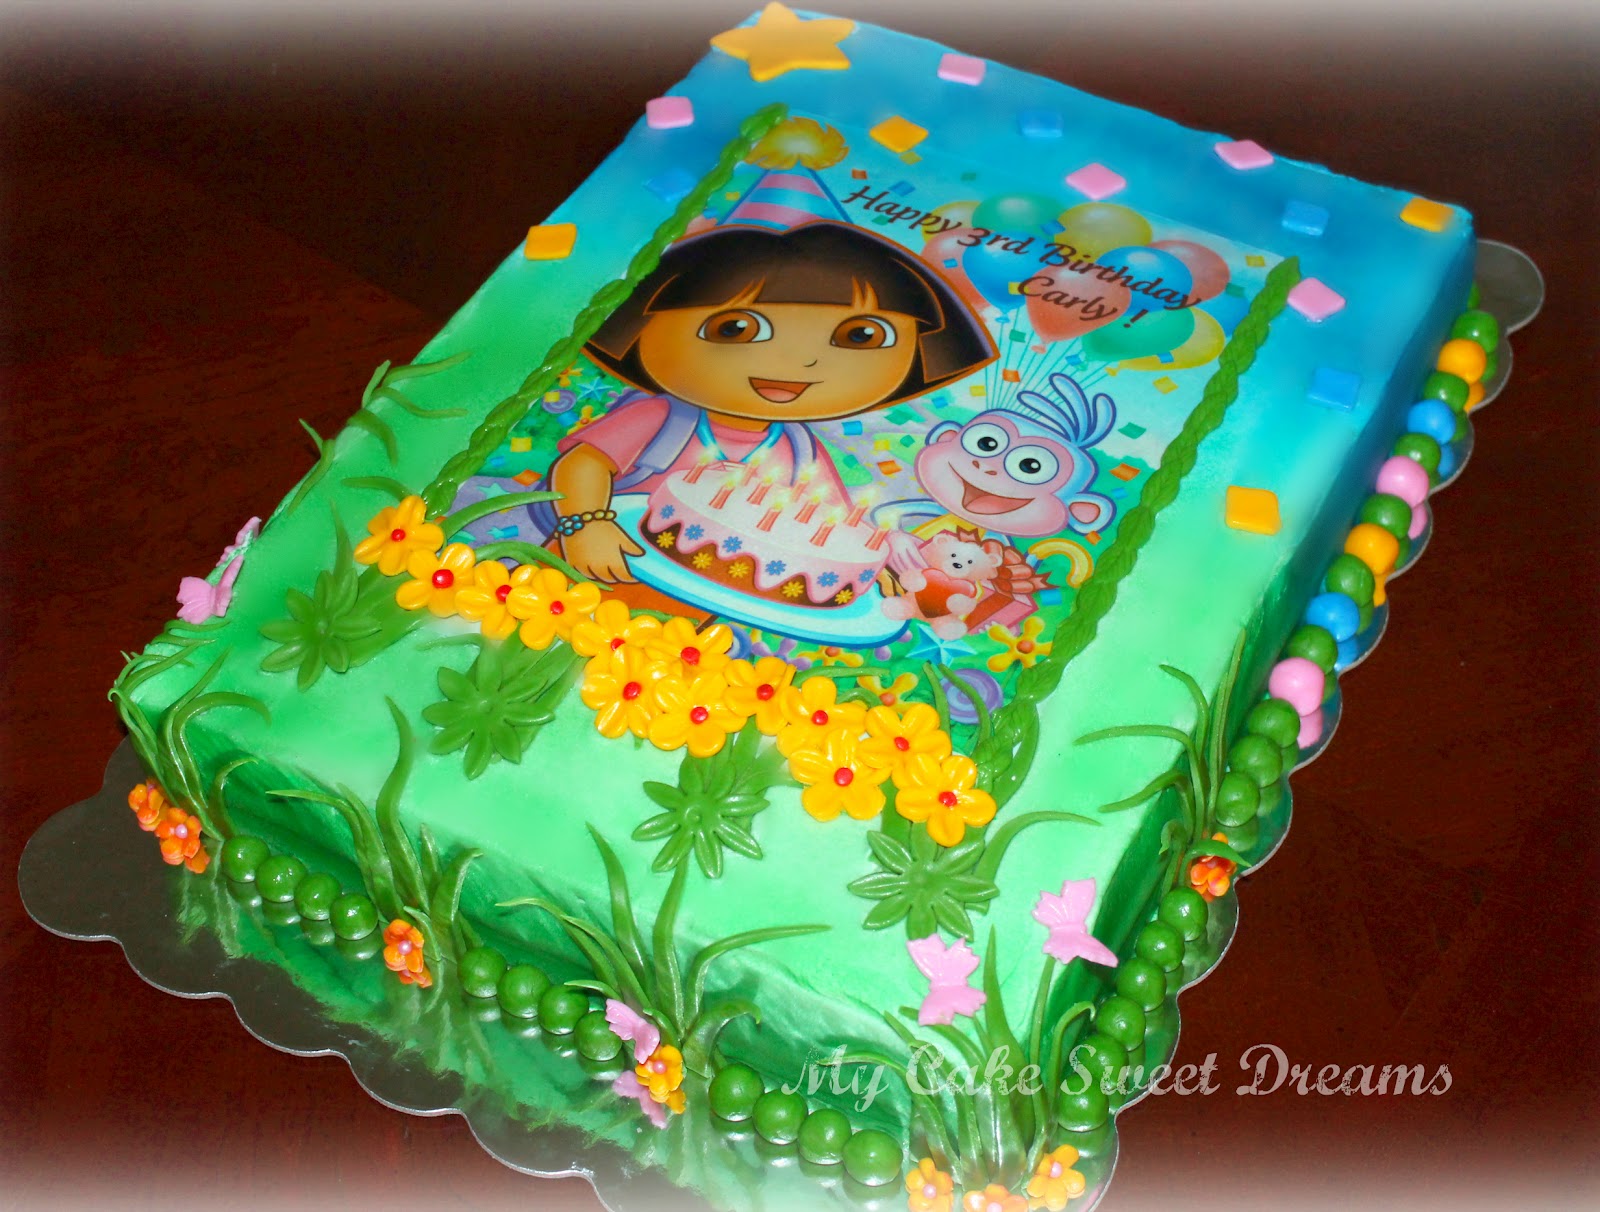 picture, buttercream fondant make with to icing, detalis  buttercream edible how fondant Cake